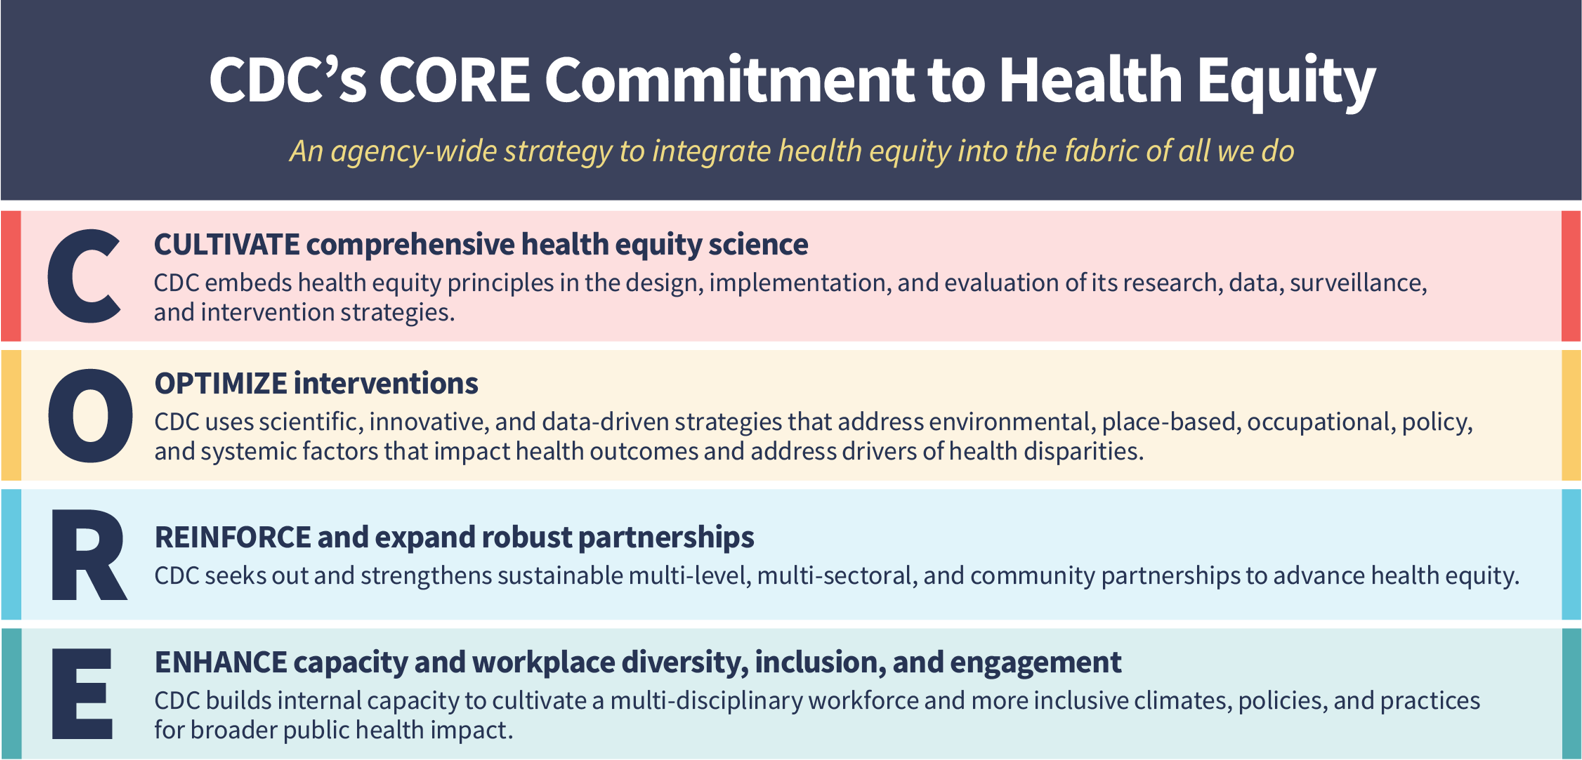 CDC's Core Commitment to Health Equity